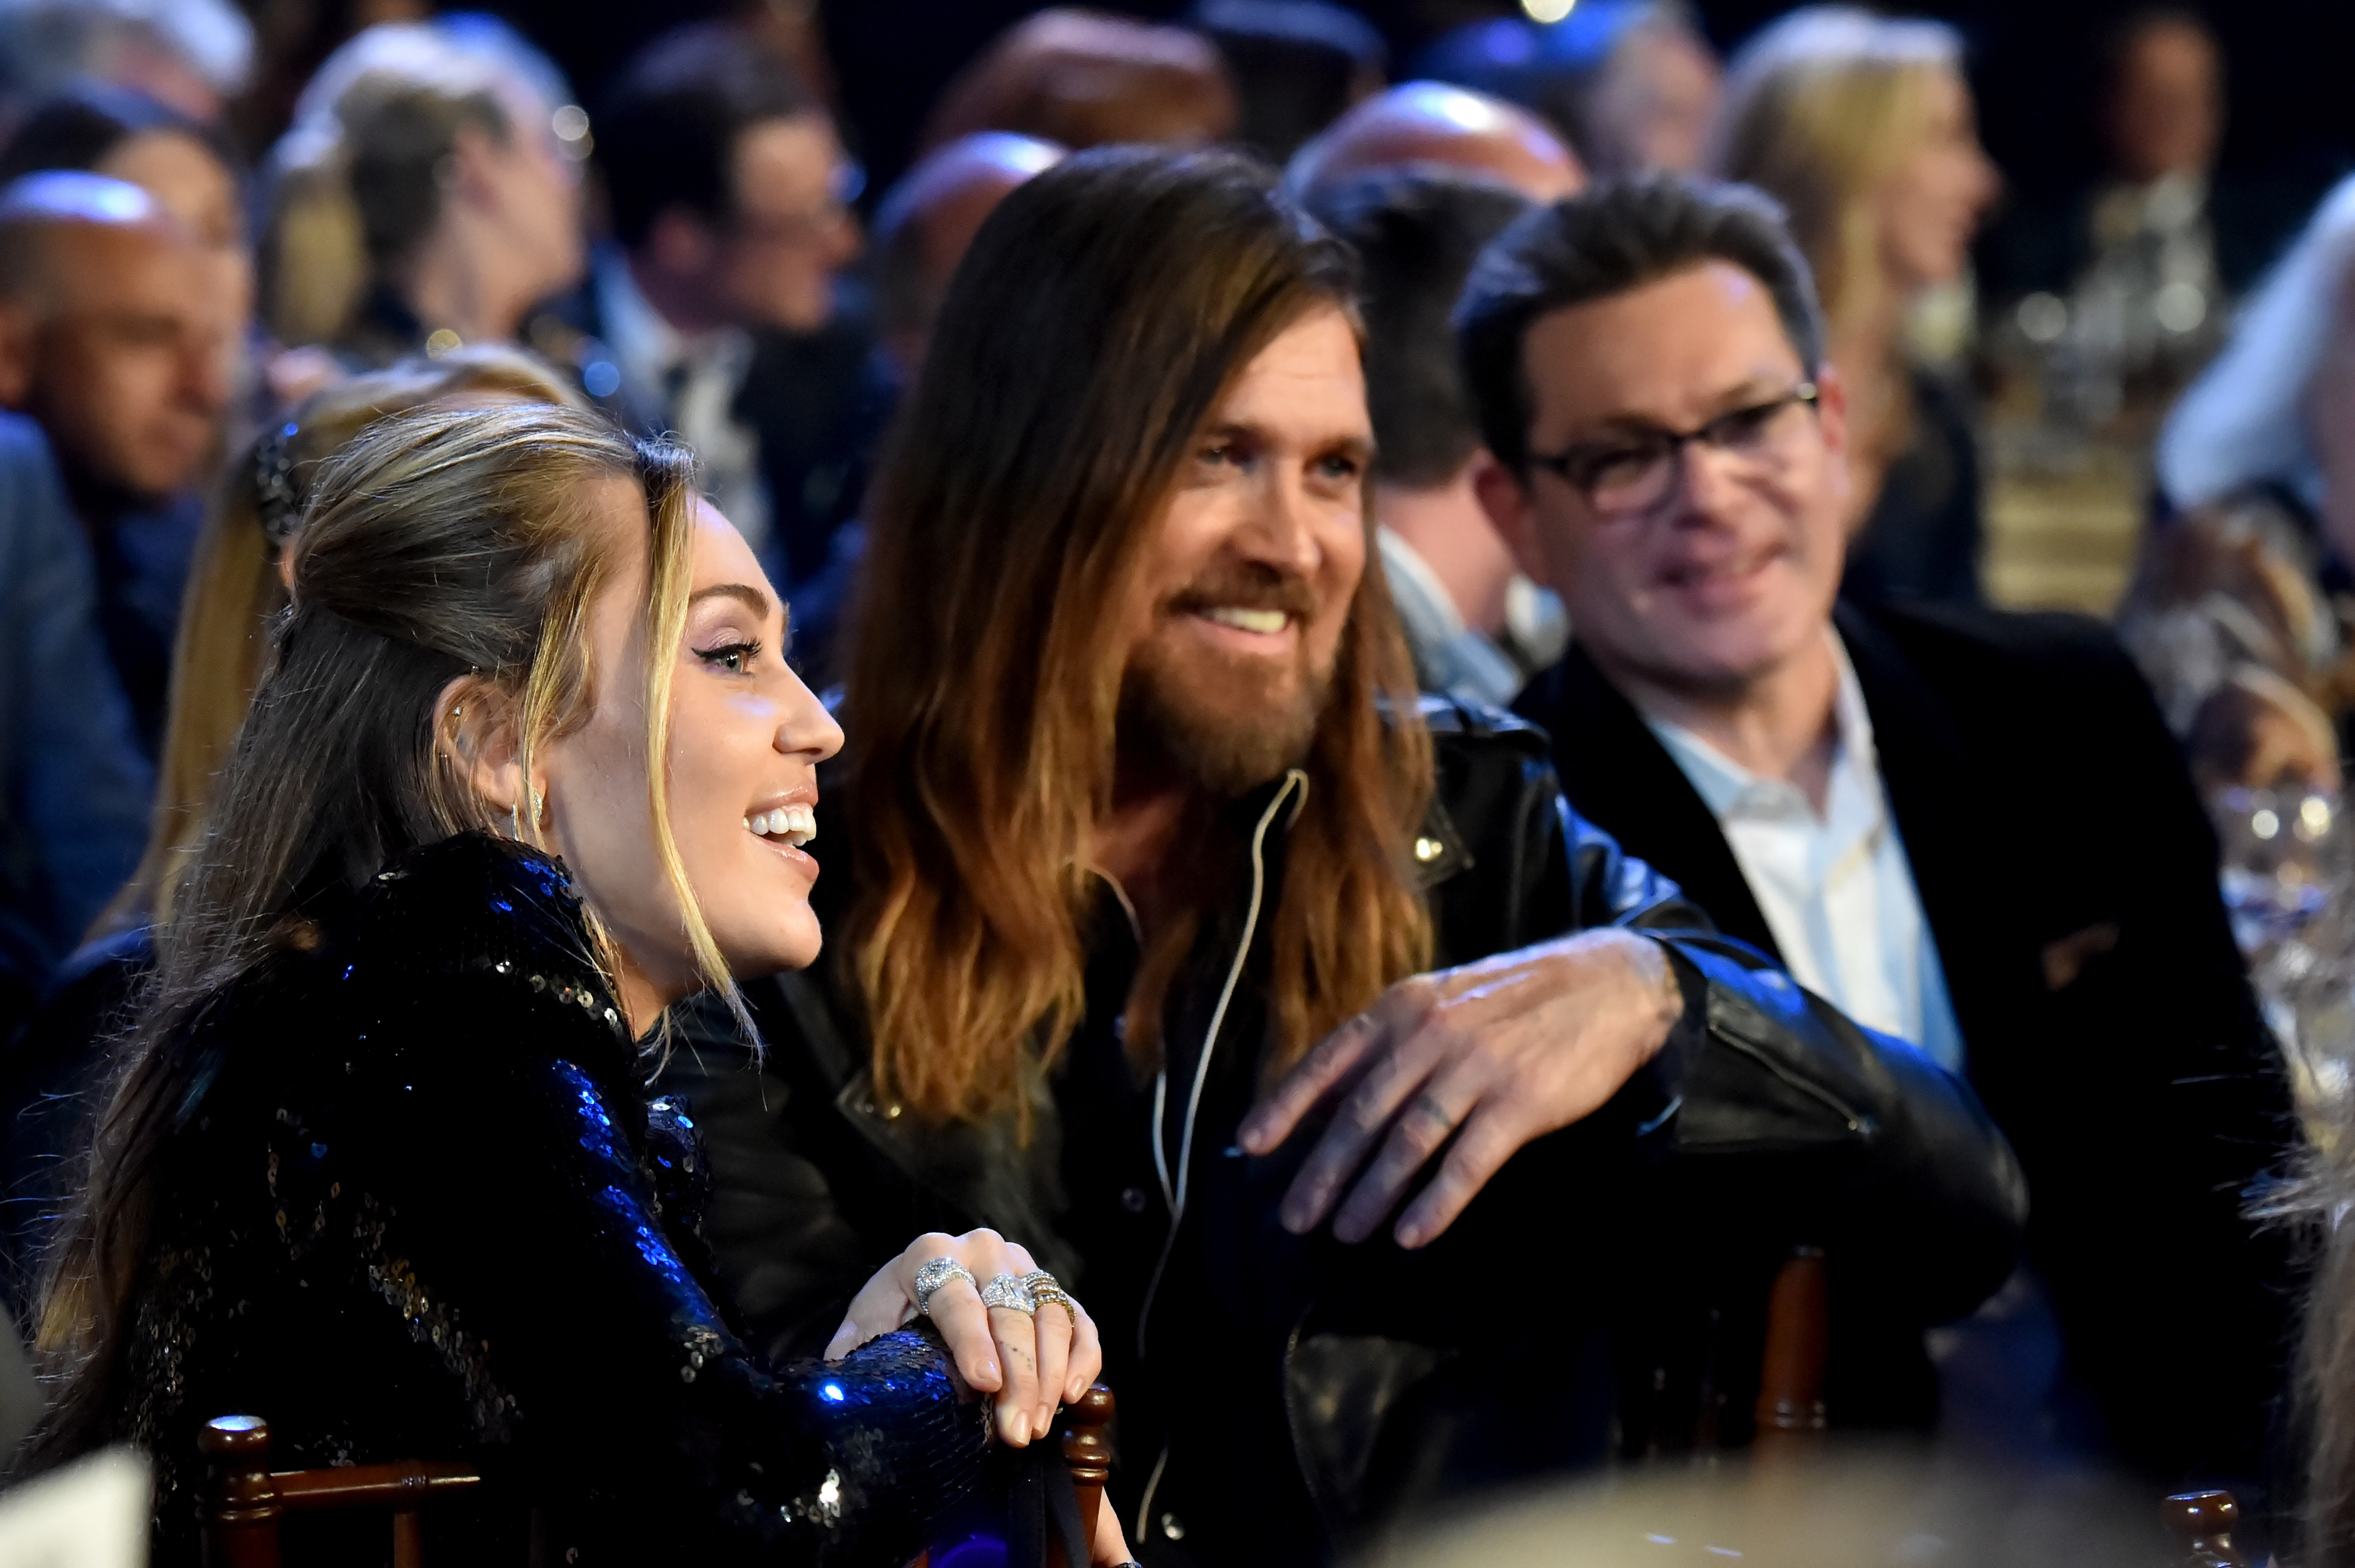 Miley Cyrus and Billy Ray Cyrus seated at an event, smiling and enjoying the moment together